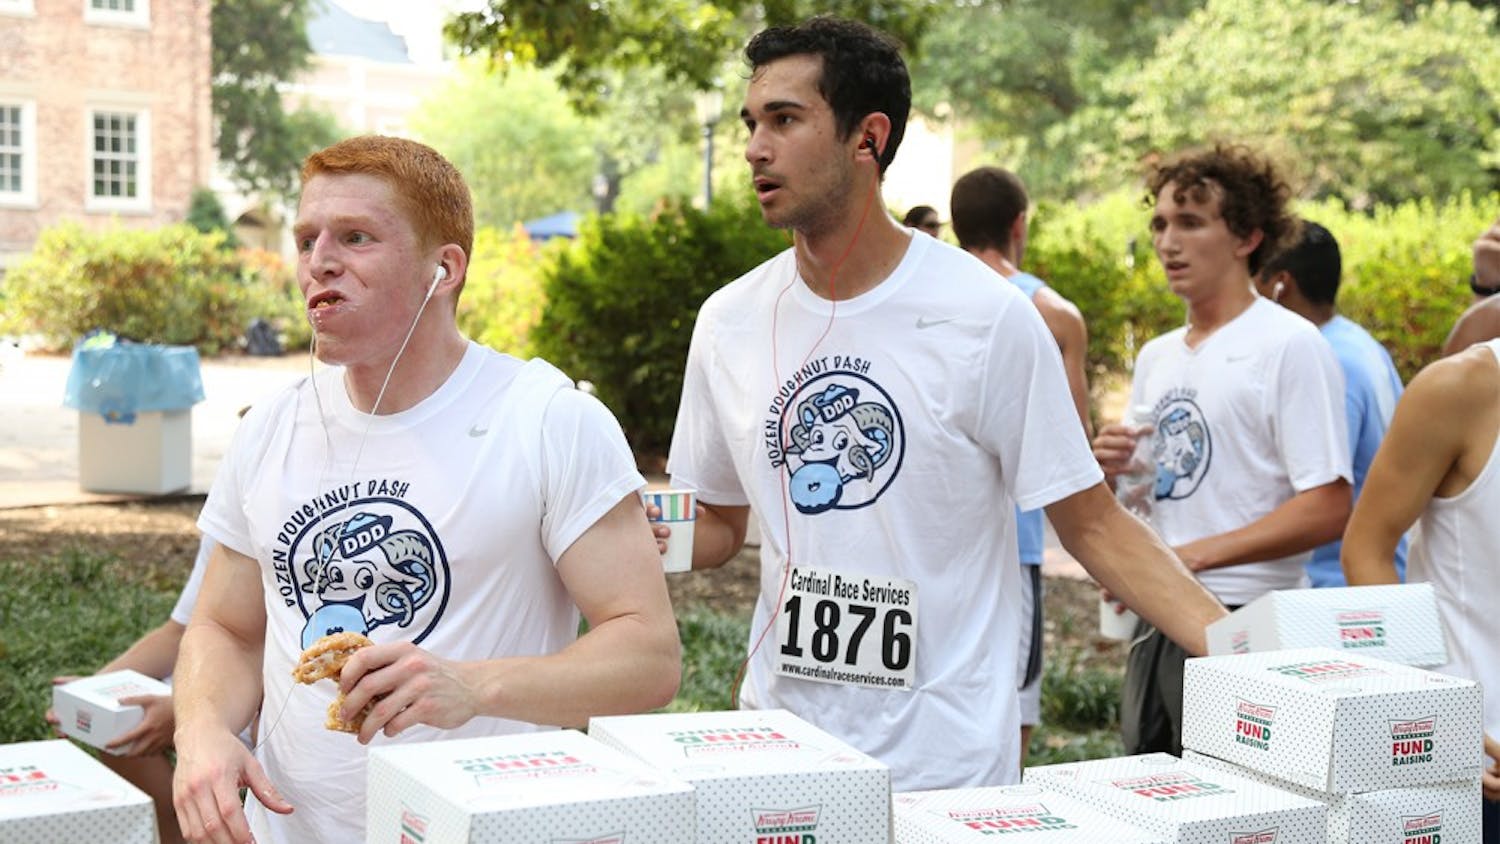 The Dozen Donut Dash began at the Old Well on Friday morning in September 2015. Participants had to run 2.5 miles before eating a dozen Krispy Kreme donuts and running another 1.5 miles. The race raises awareness and support for cancer patients.&nbsp;